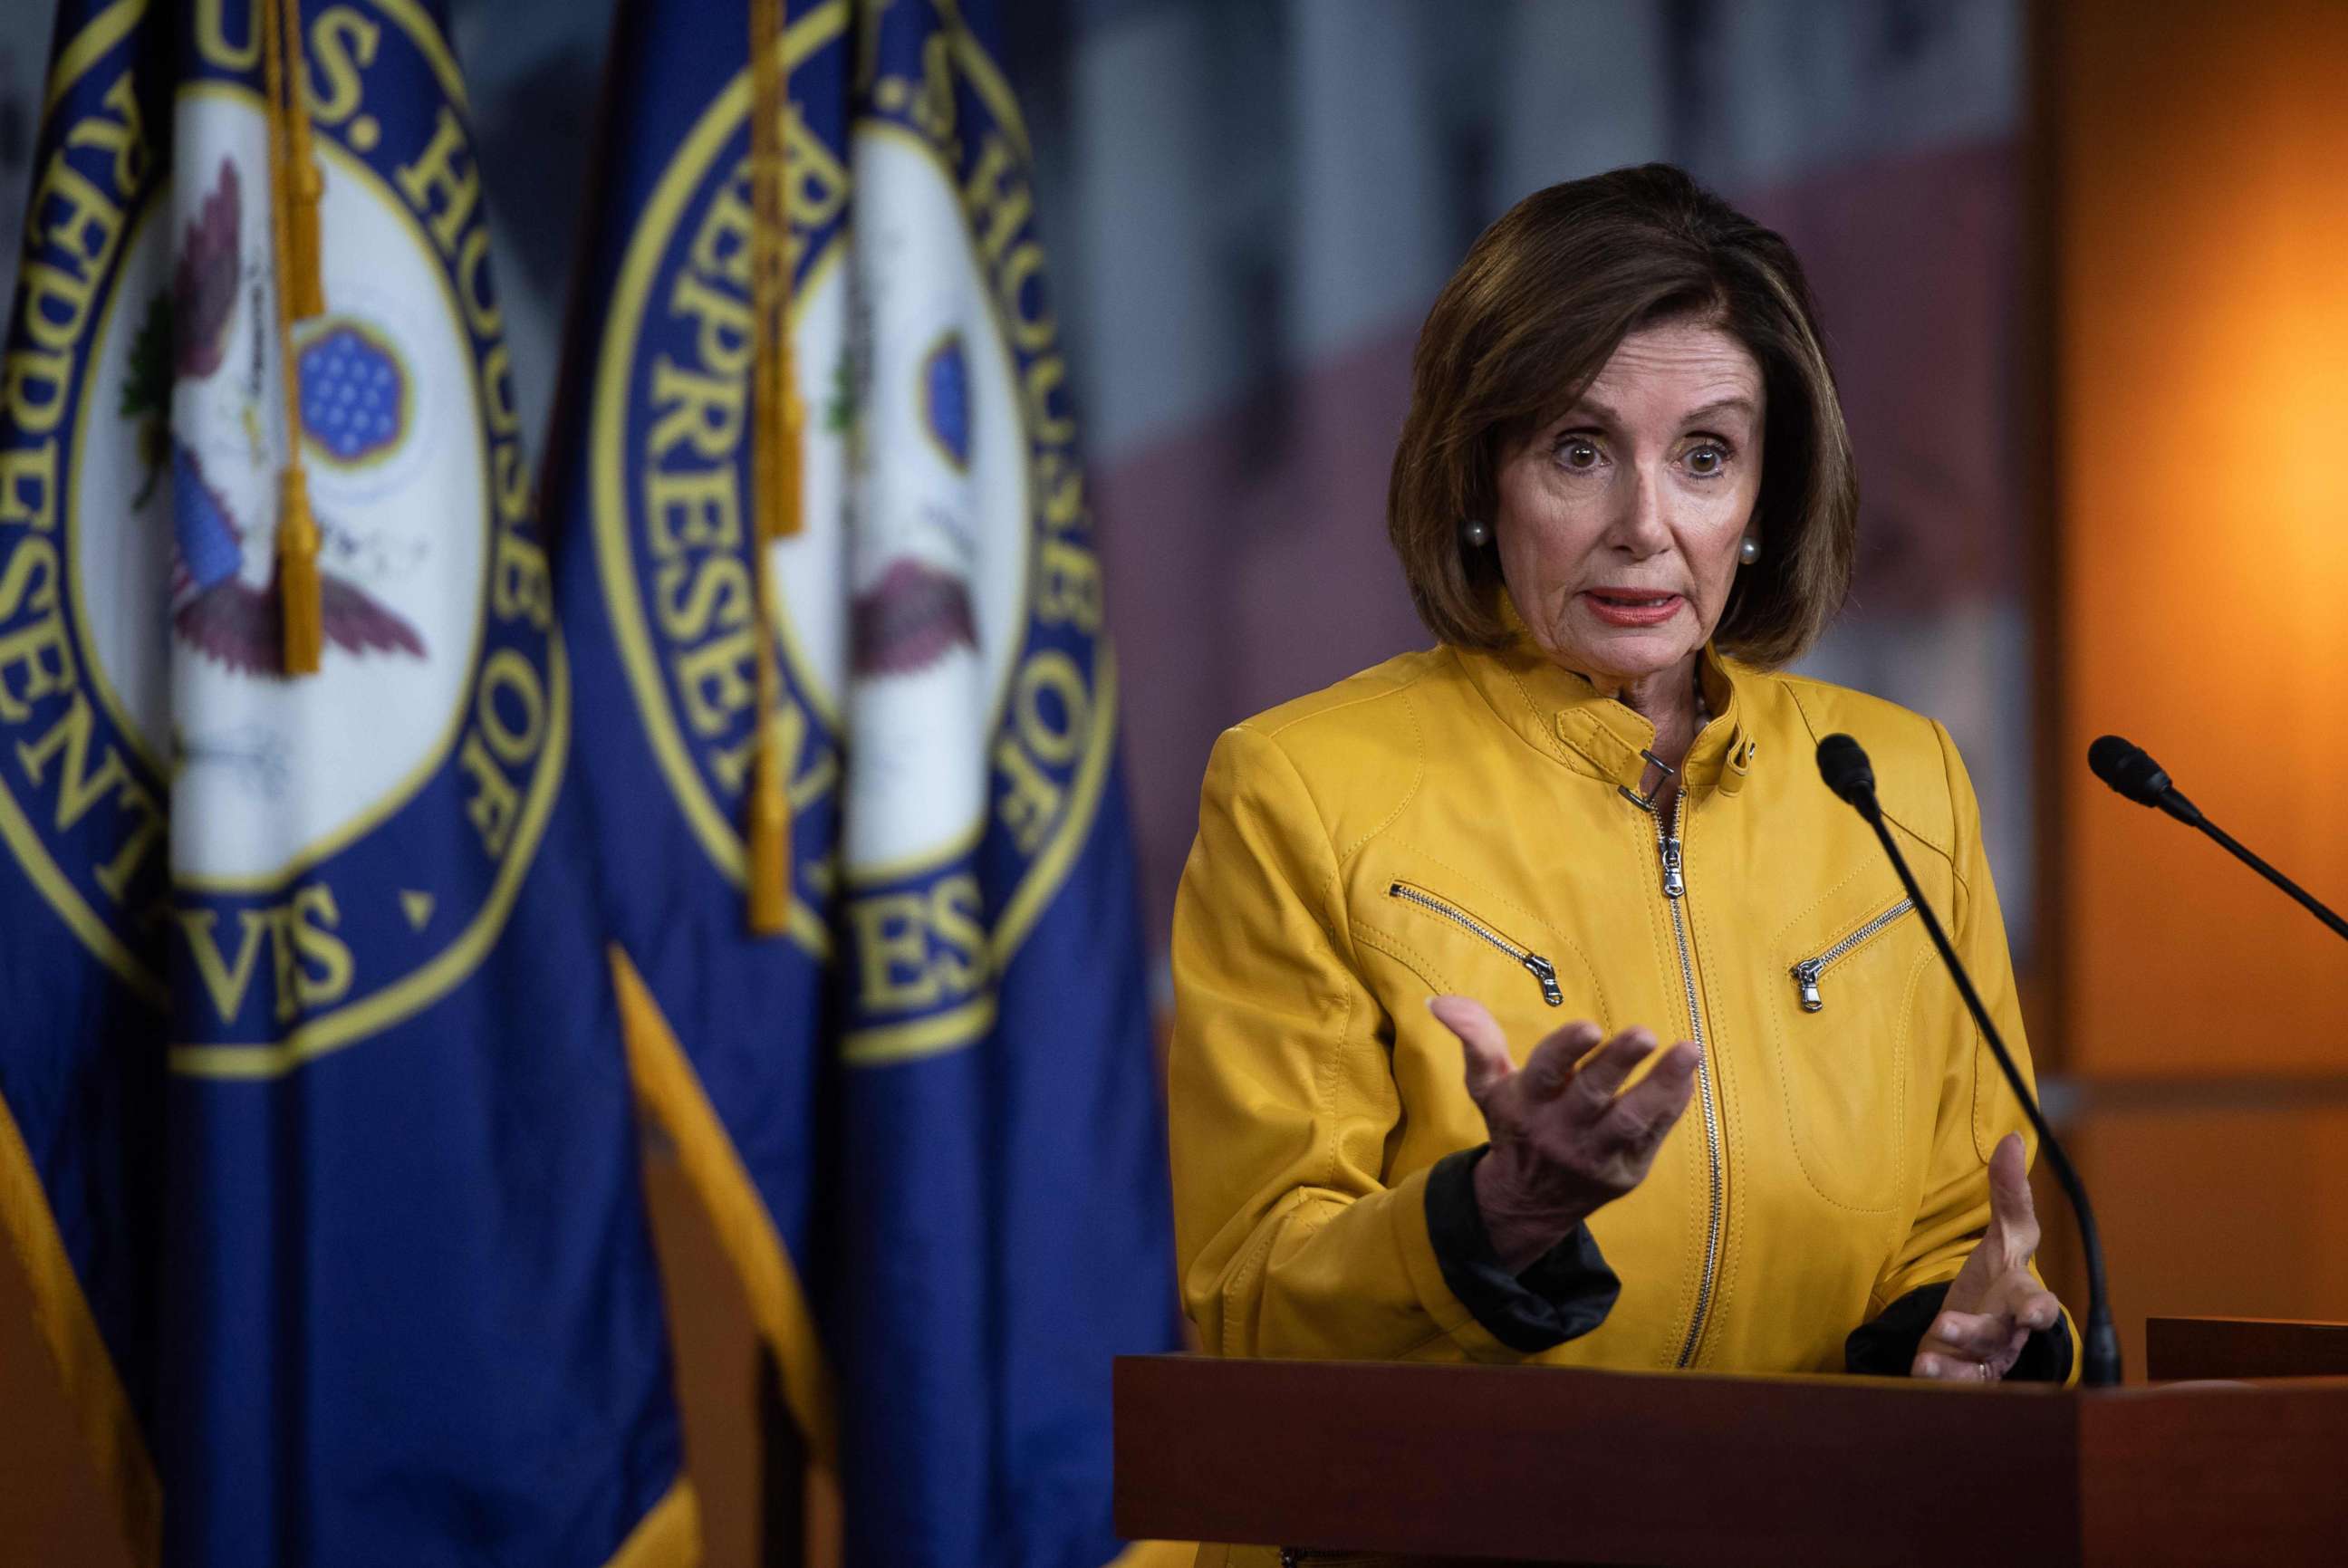 PHOTO: Speaker of the House of Representatives Nancy Pelosi speaks to the press, June 13, 2019, during her weekly press conference on Capitol Hill.